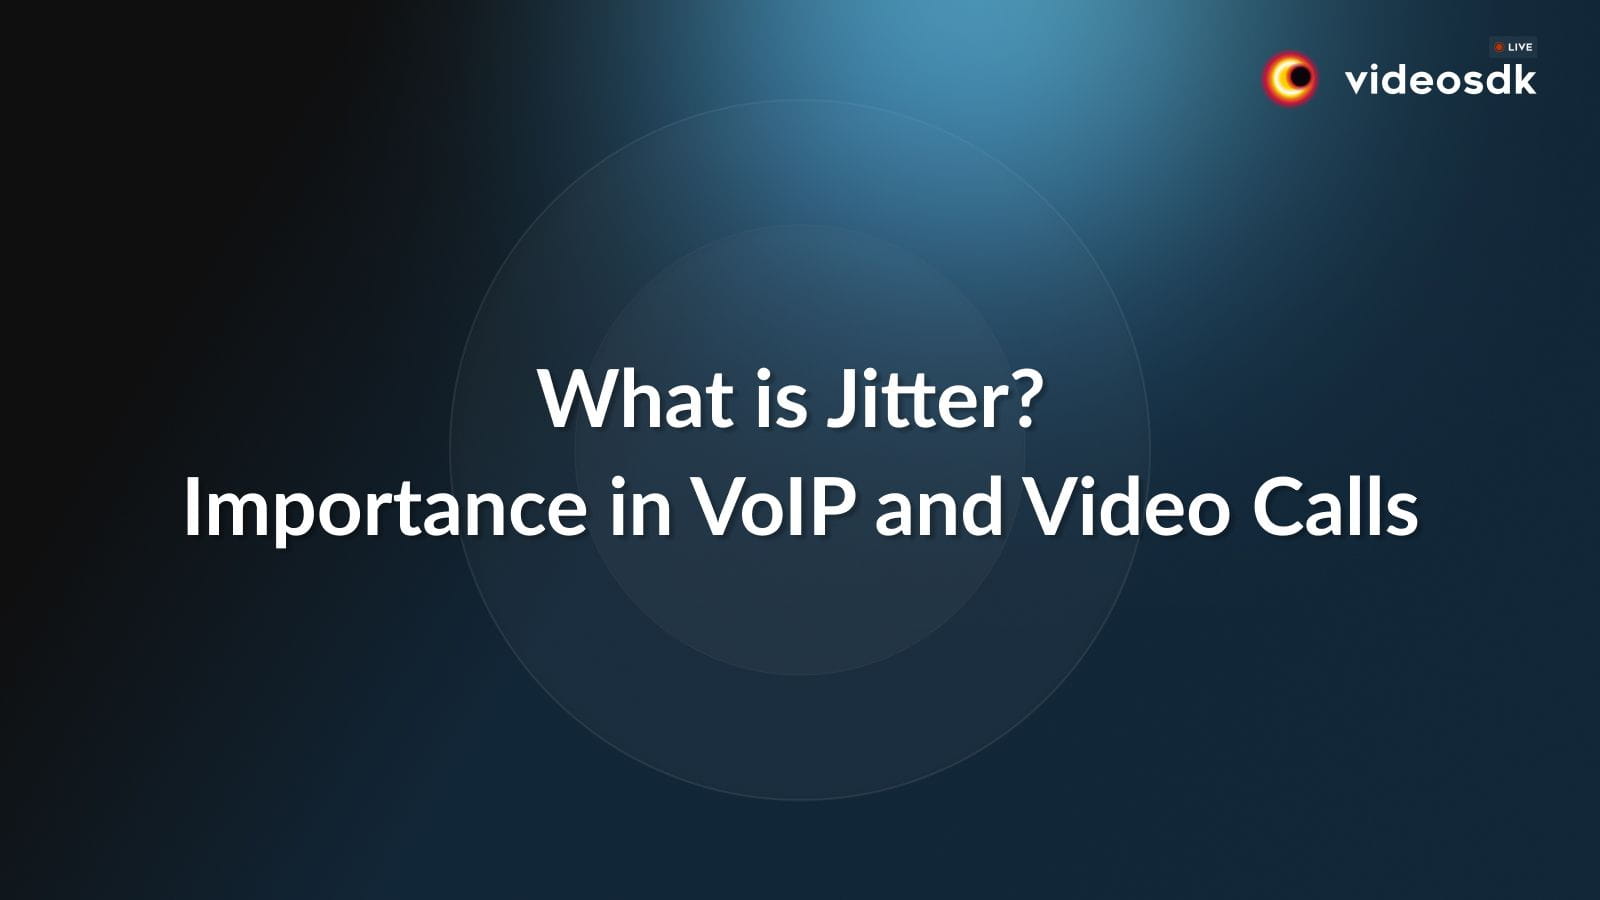 What is Jitter? Importance of Jitter in VoIP and Video Calls